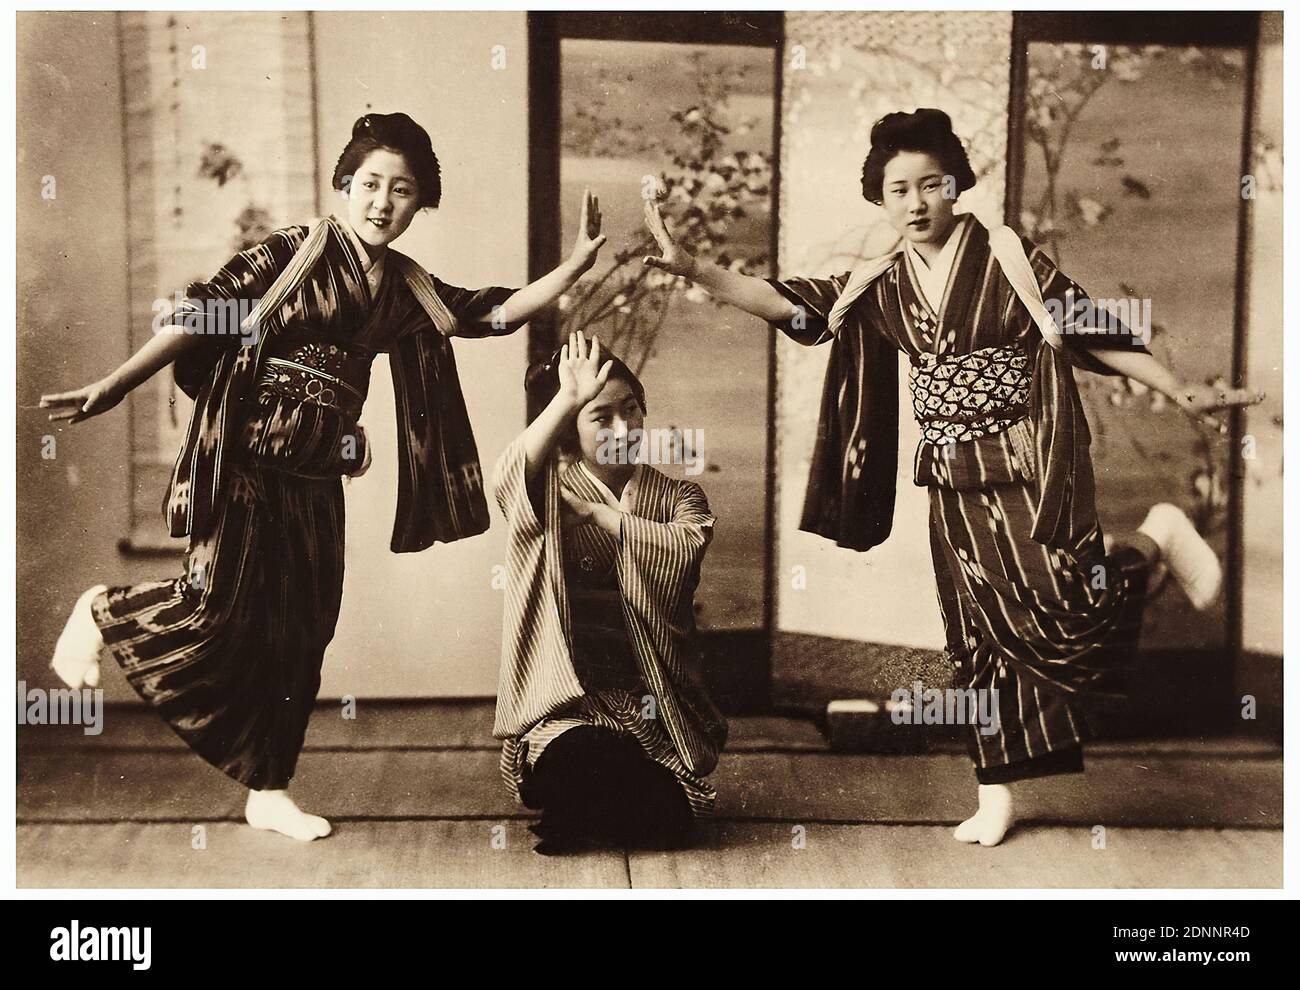 Three dancing women, albumin paper, black and white positive process, Total: Height: 12,50 cm; Width: 17,90 cm, travel photography, portrait photography, group portrait, full-length portrait, dancing, young woman, girl, screen, screen, folk costume, regional costume Stock Photo